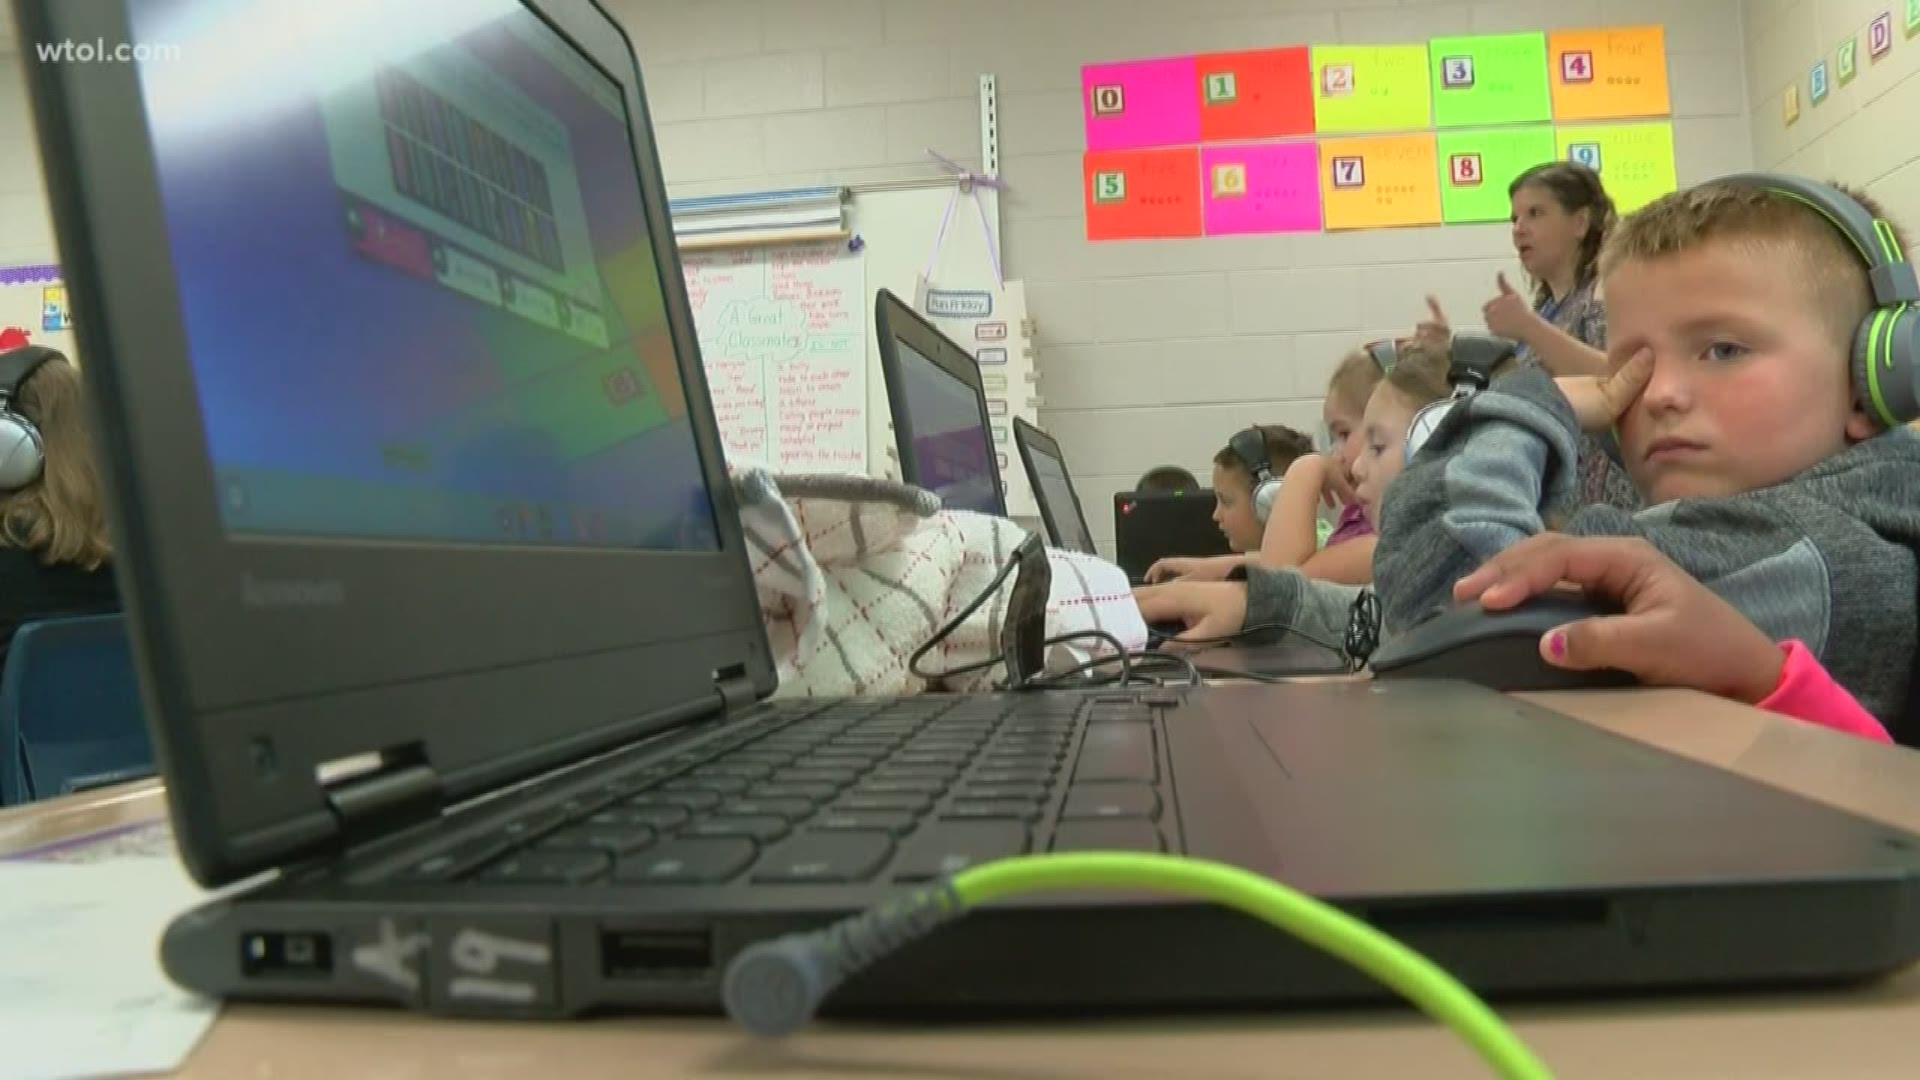 TPS is repurposing Chromebooks in an effort to keep kids learning during the summer months